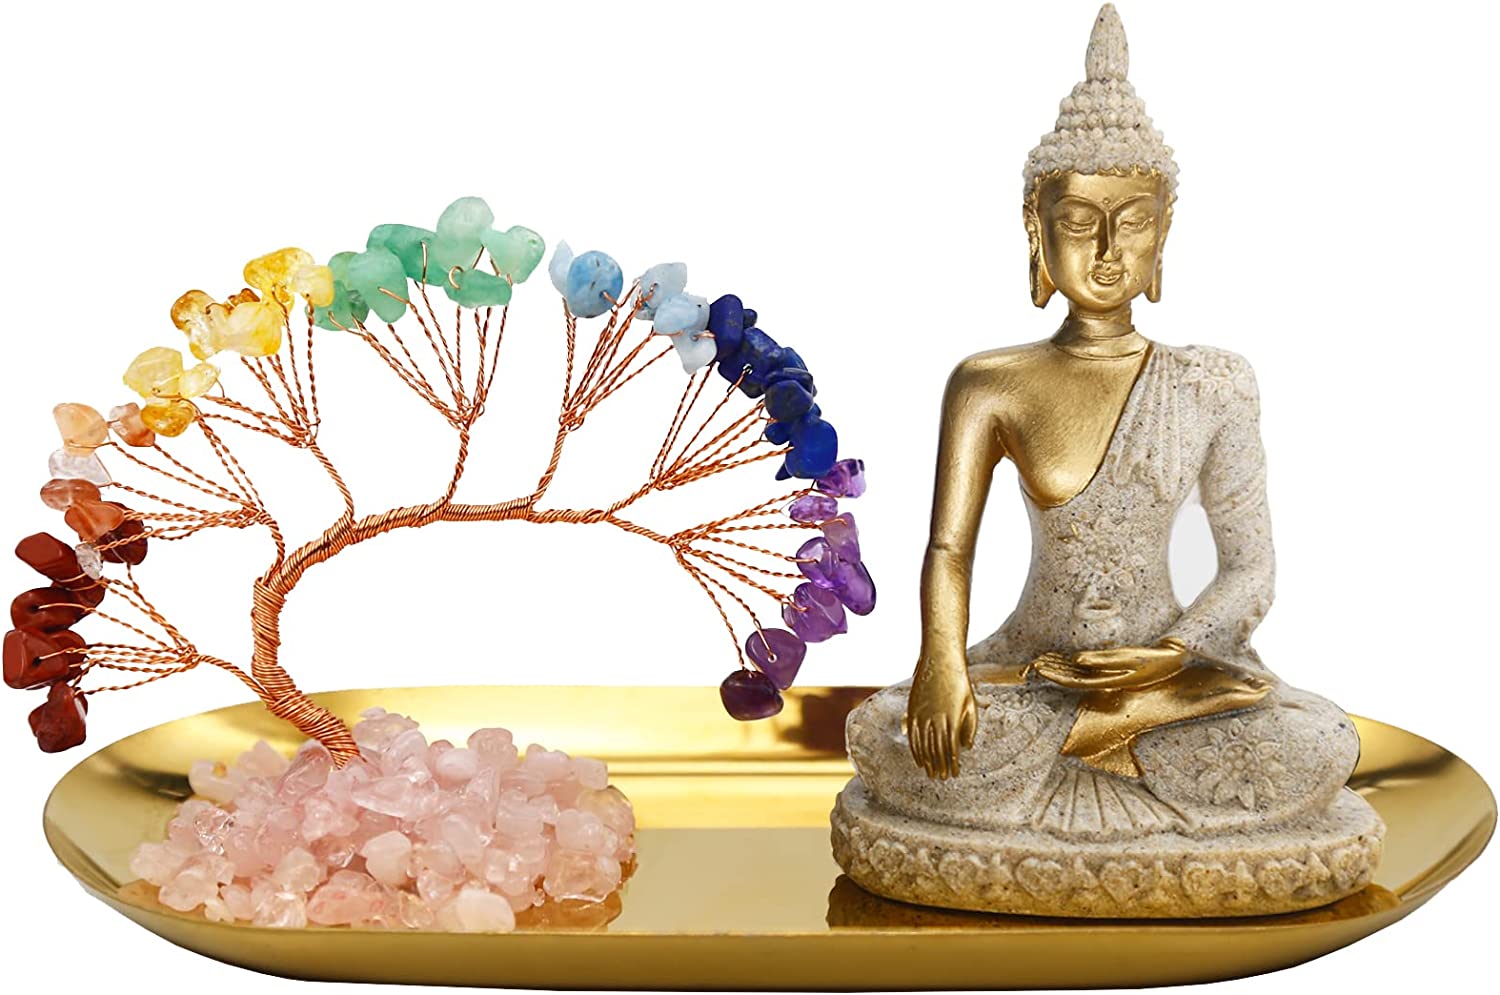 Crystal Tree and Buddha Statue Yoga Meditation and Zen Decor Ideas - Personal Hour for Yoga and Meditations 